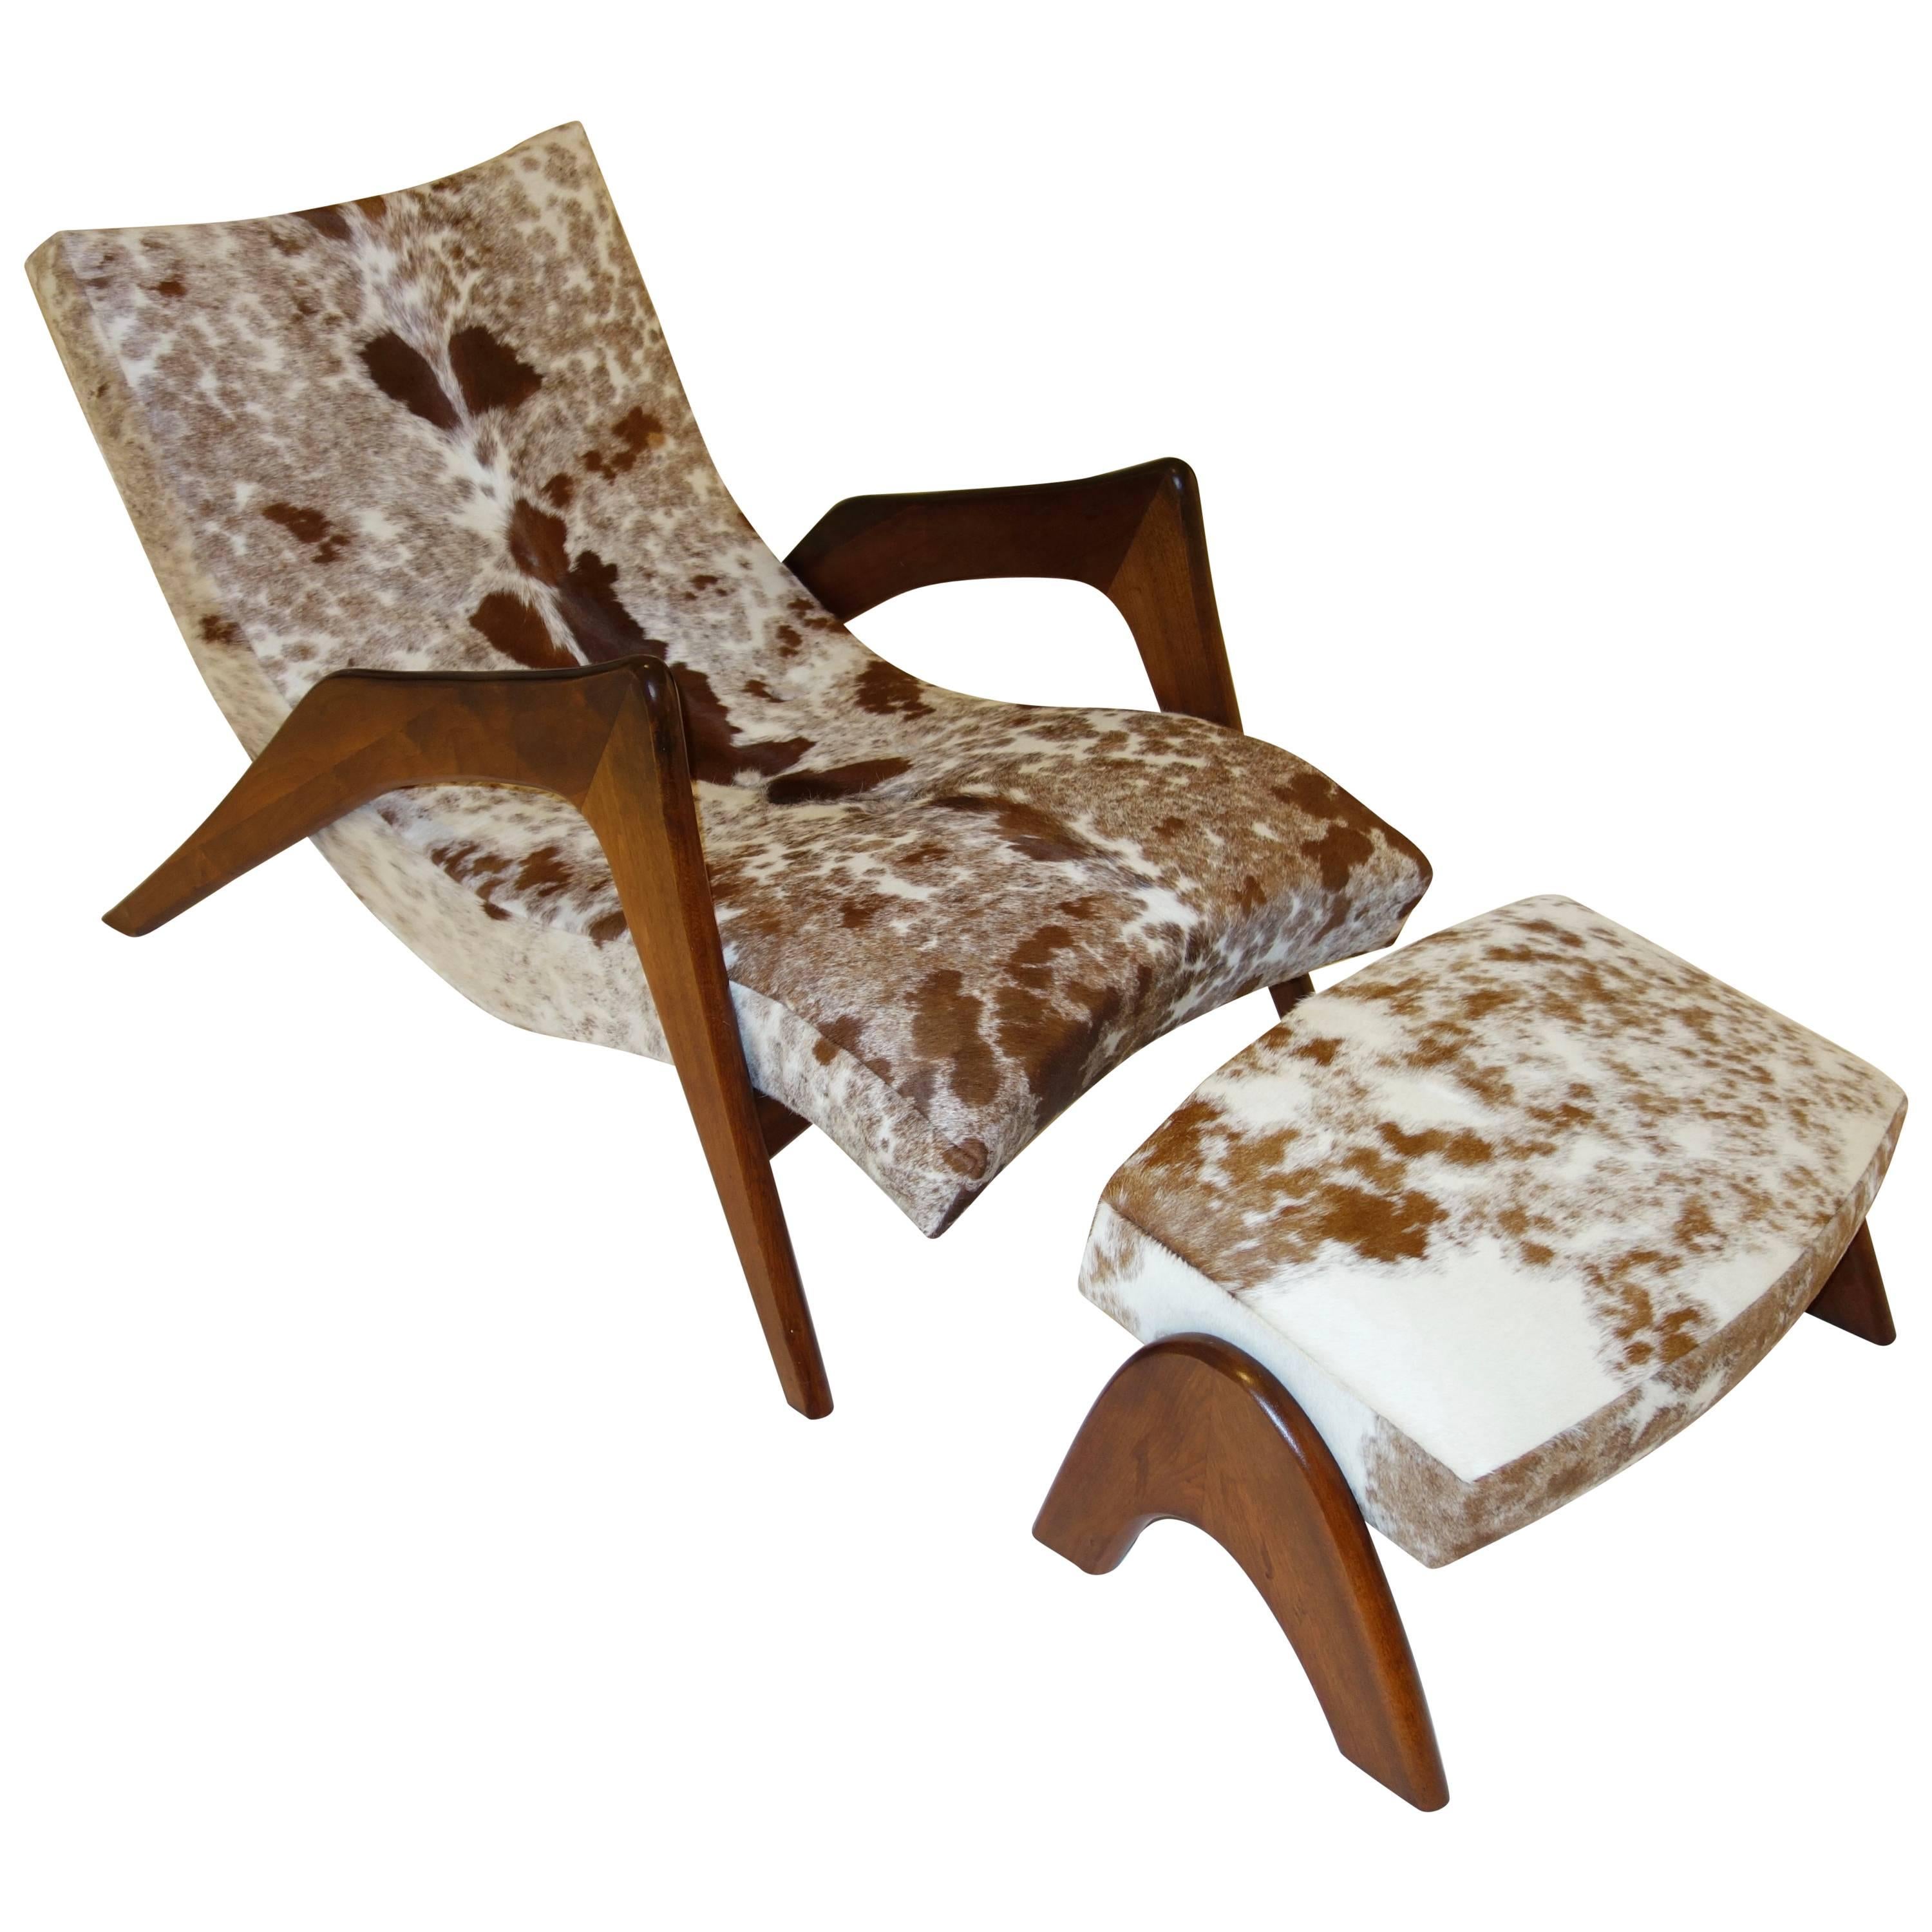 Rare "Crescent" Lounge Chair and Ottoman by Adrian Pearsall in Cowhide